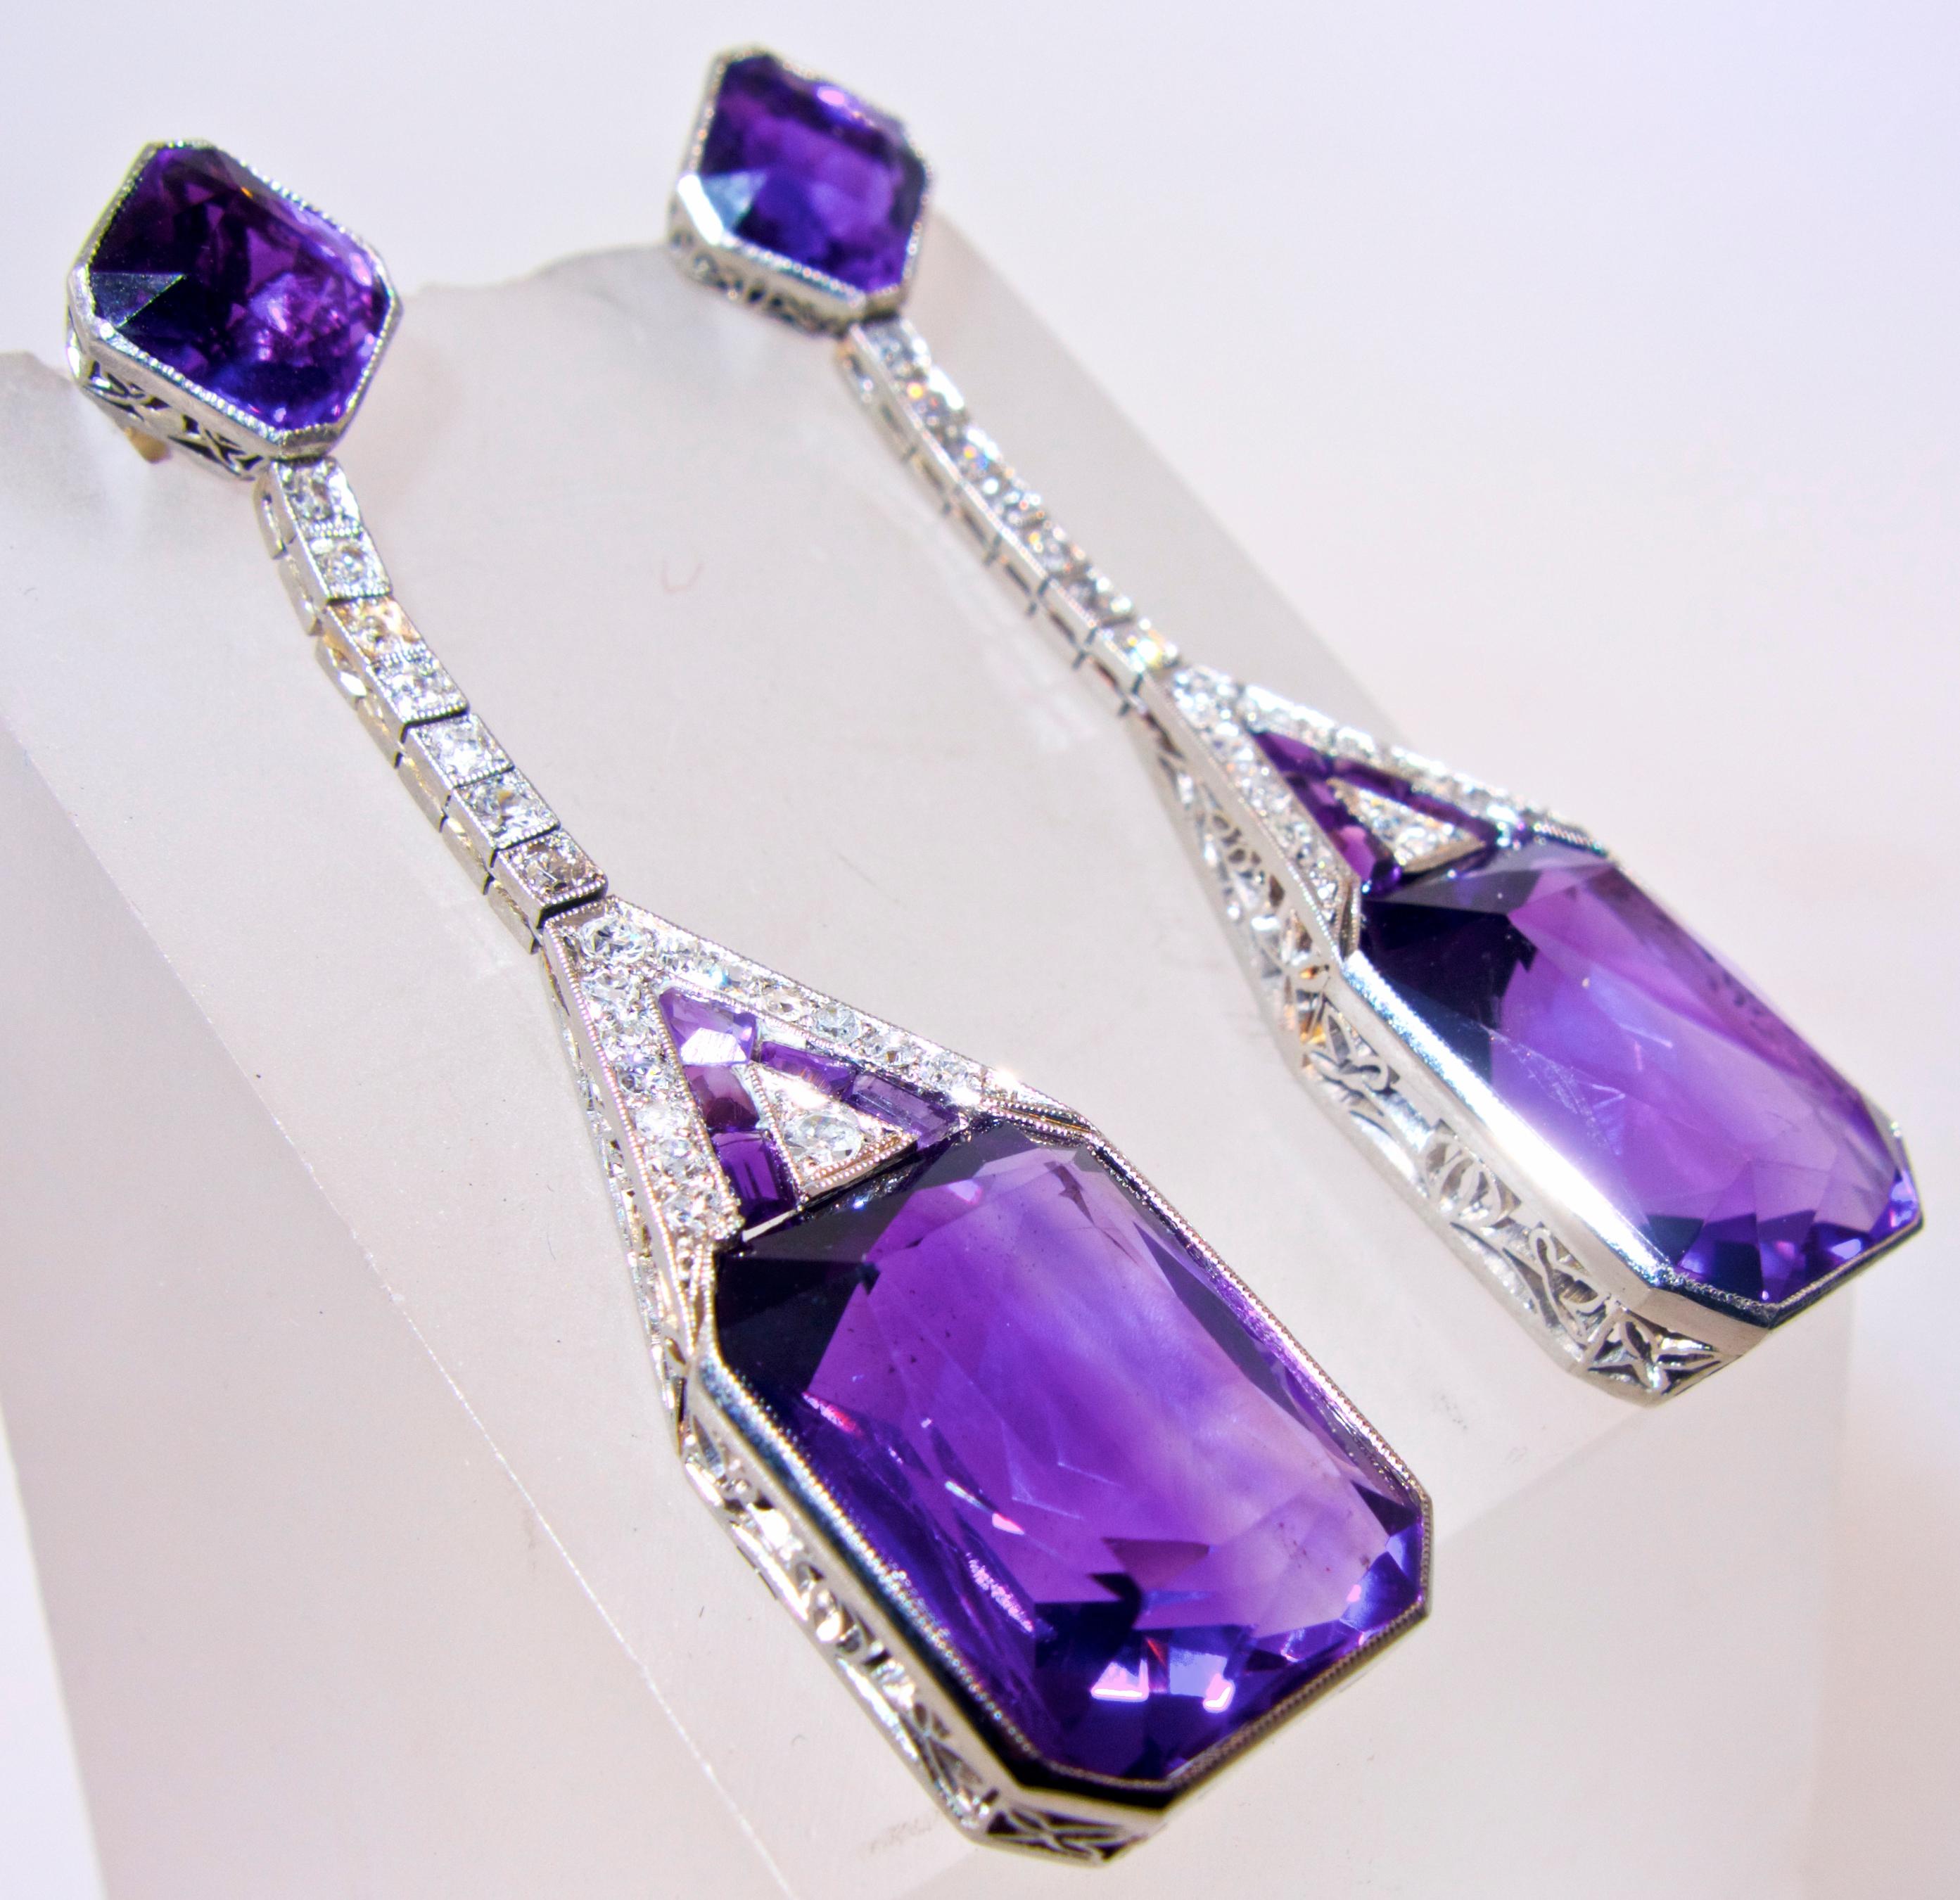 Platinum Art Deco Diamond and Amethyst earrings - long pendant style with rectangular cut fine matching bright purple natural amethysts and emerald cut amethysts and calibre cut amethysts.  The 42 round old cut diamonds are bead set, all of the